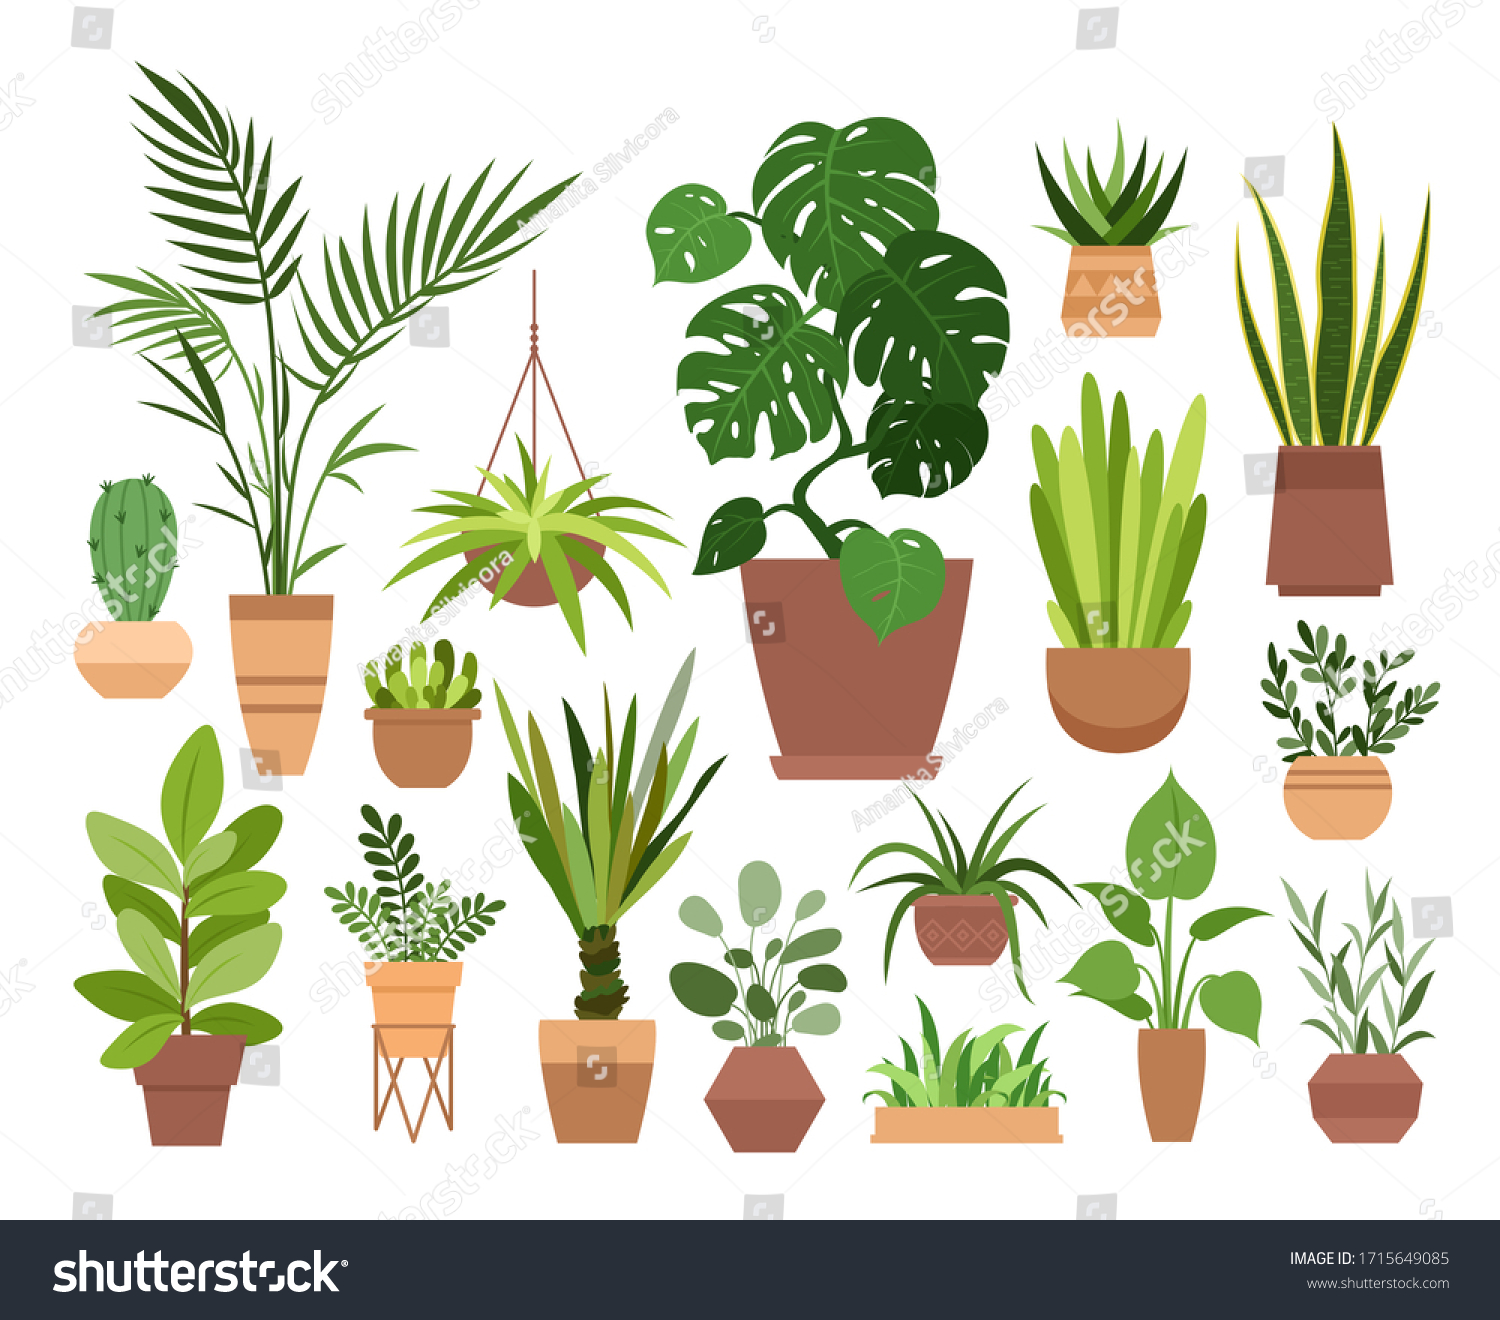 Plant in pot vector illustration set. Cartoon flat different indoor potted decorative houseplants for interior home or office decoration, green garden floral collection icons isolated on white #1715649085